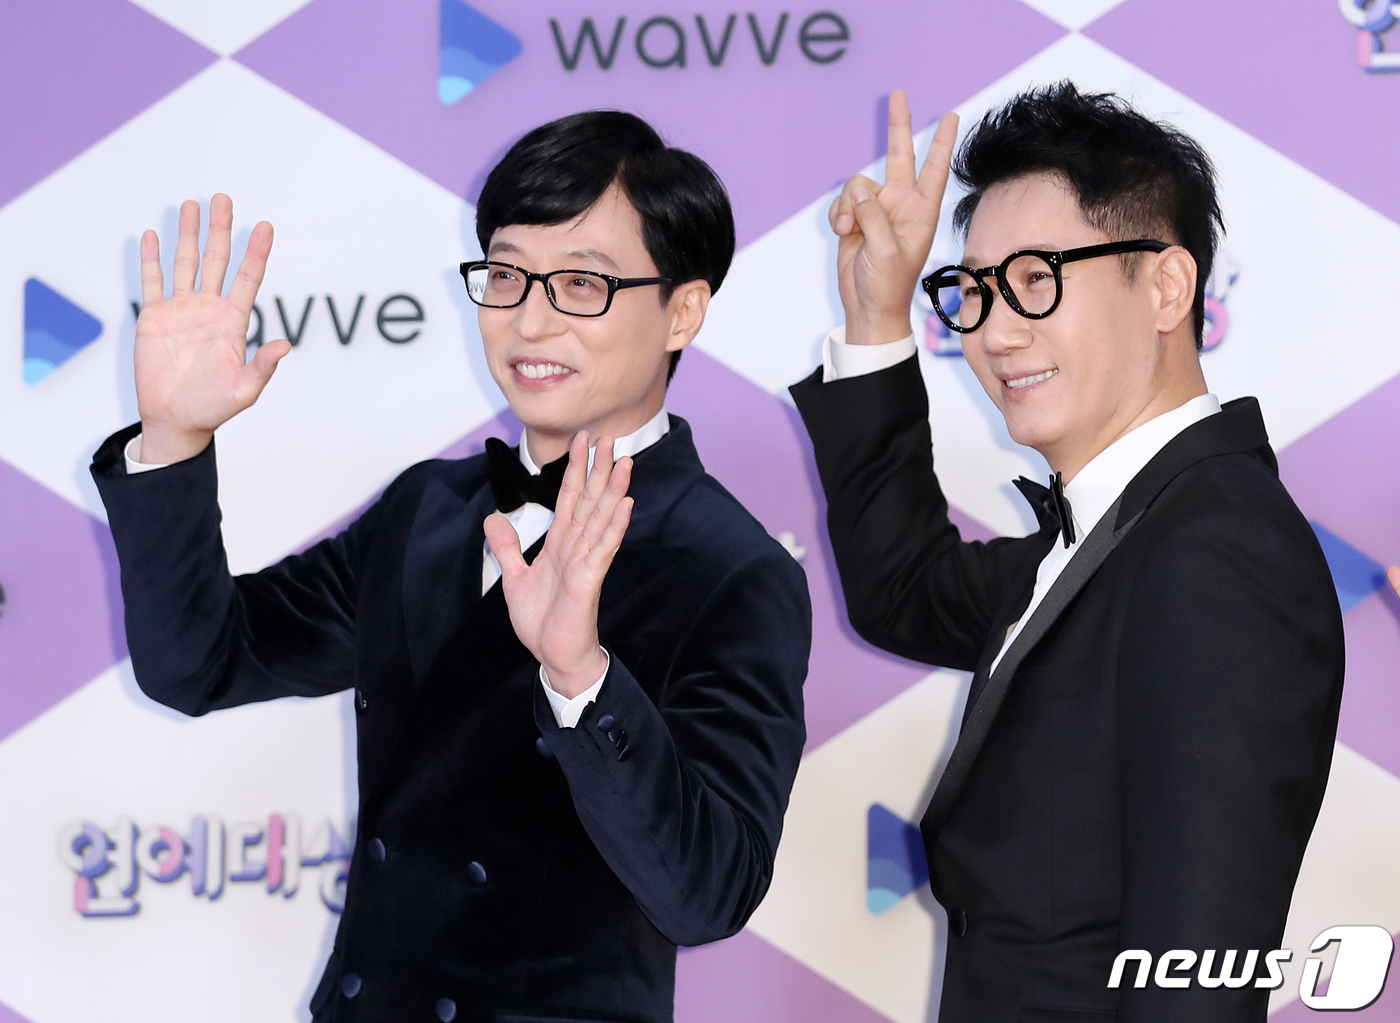 Seoul = = Comedians Yoo Jae-Suk and Ji Suk-jin (right) pose at the 2019 SBS Entertainment Awards photocall event held at SBS Prism Tower in Sangam-dong, Mapo-gu, Seoul on the afternoon of the 28th.December 28, 2019